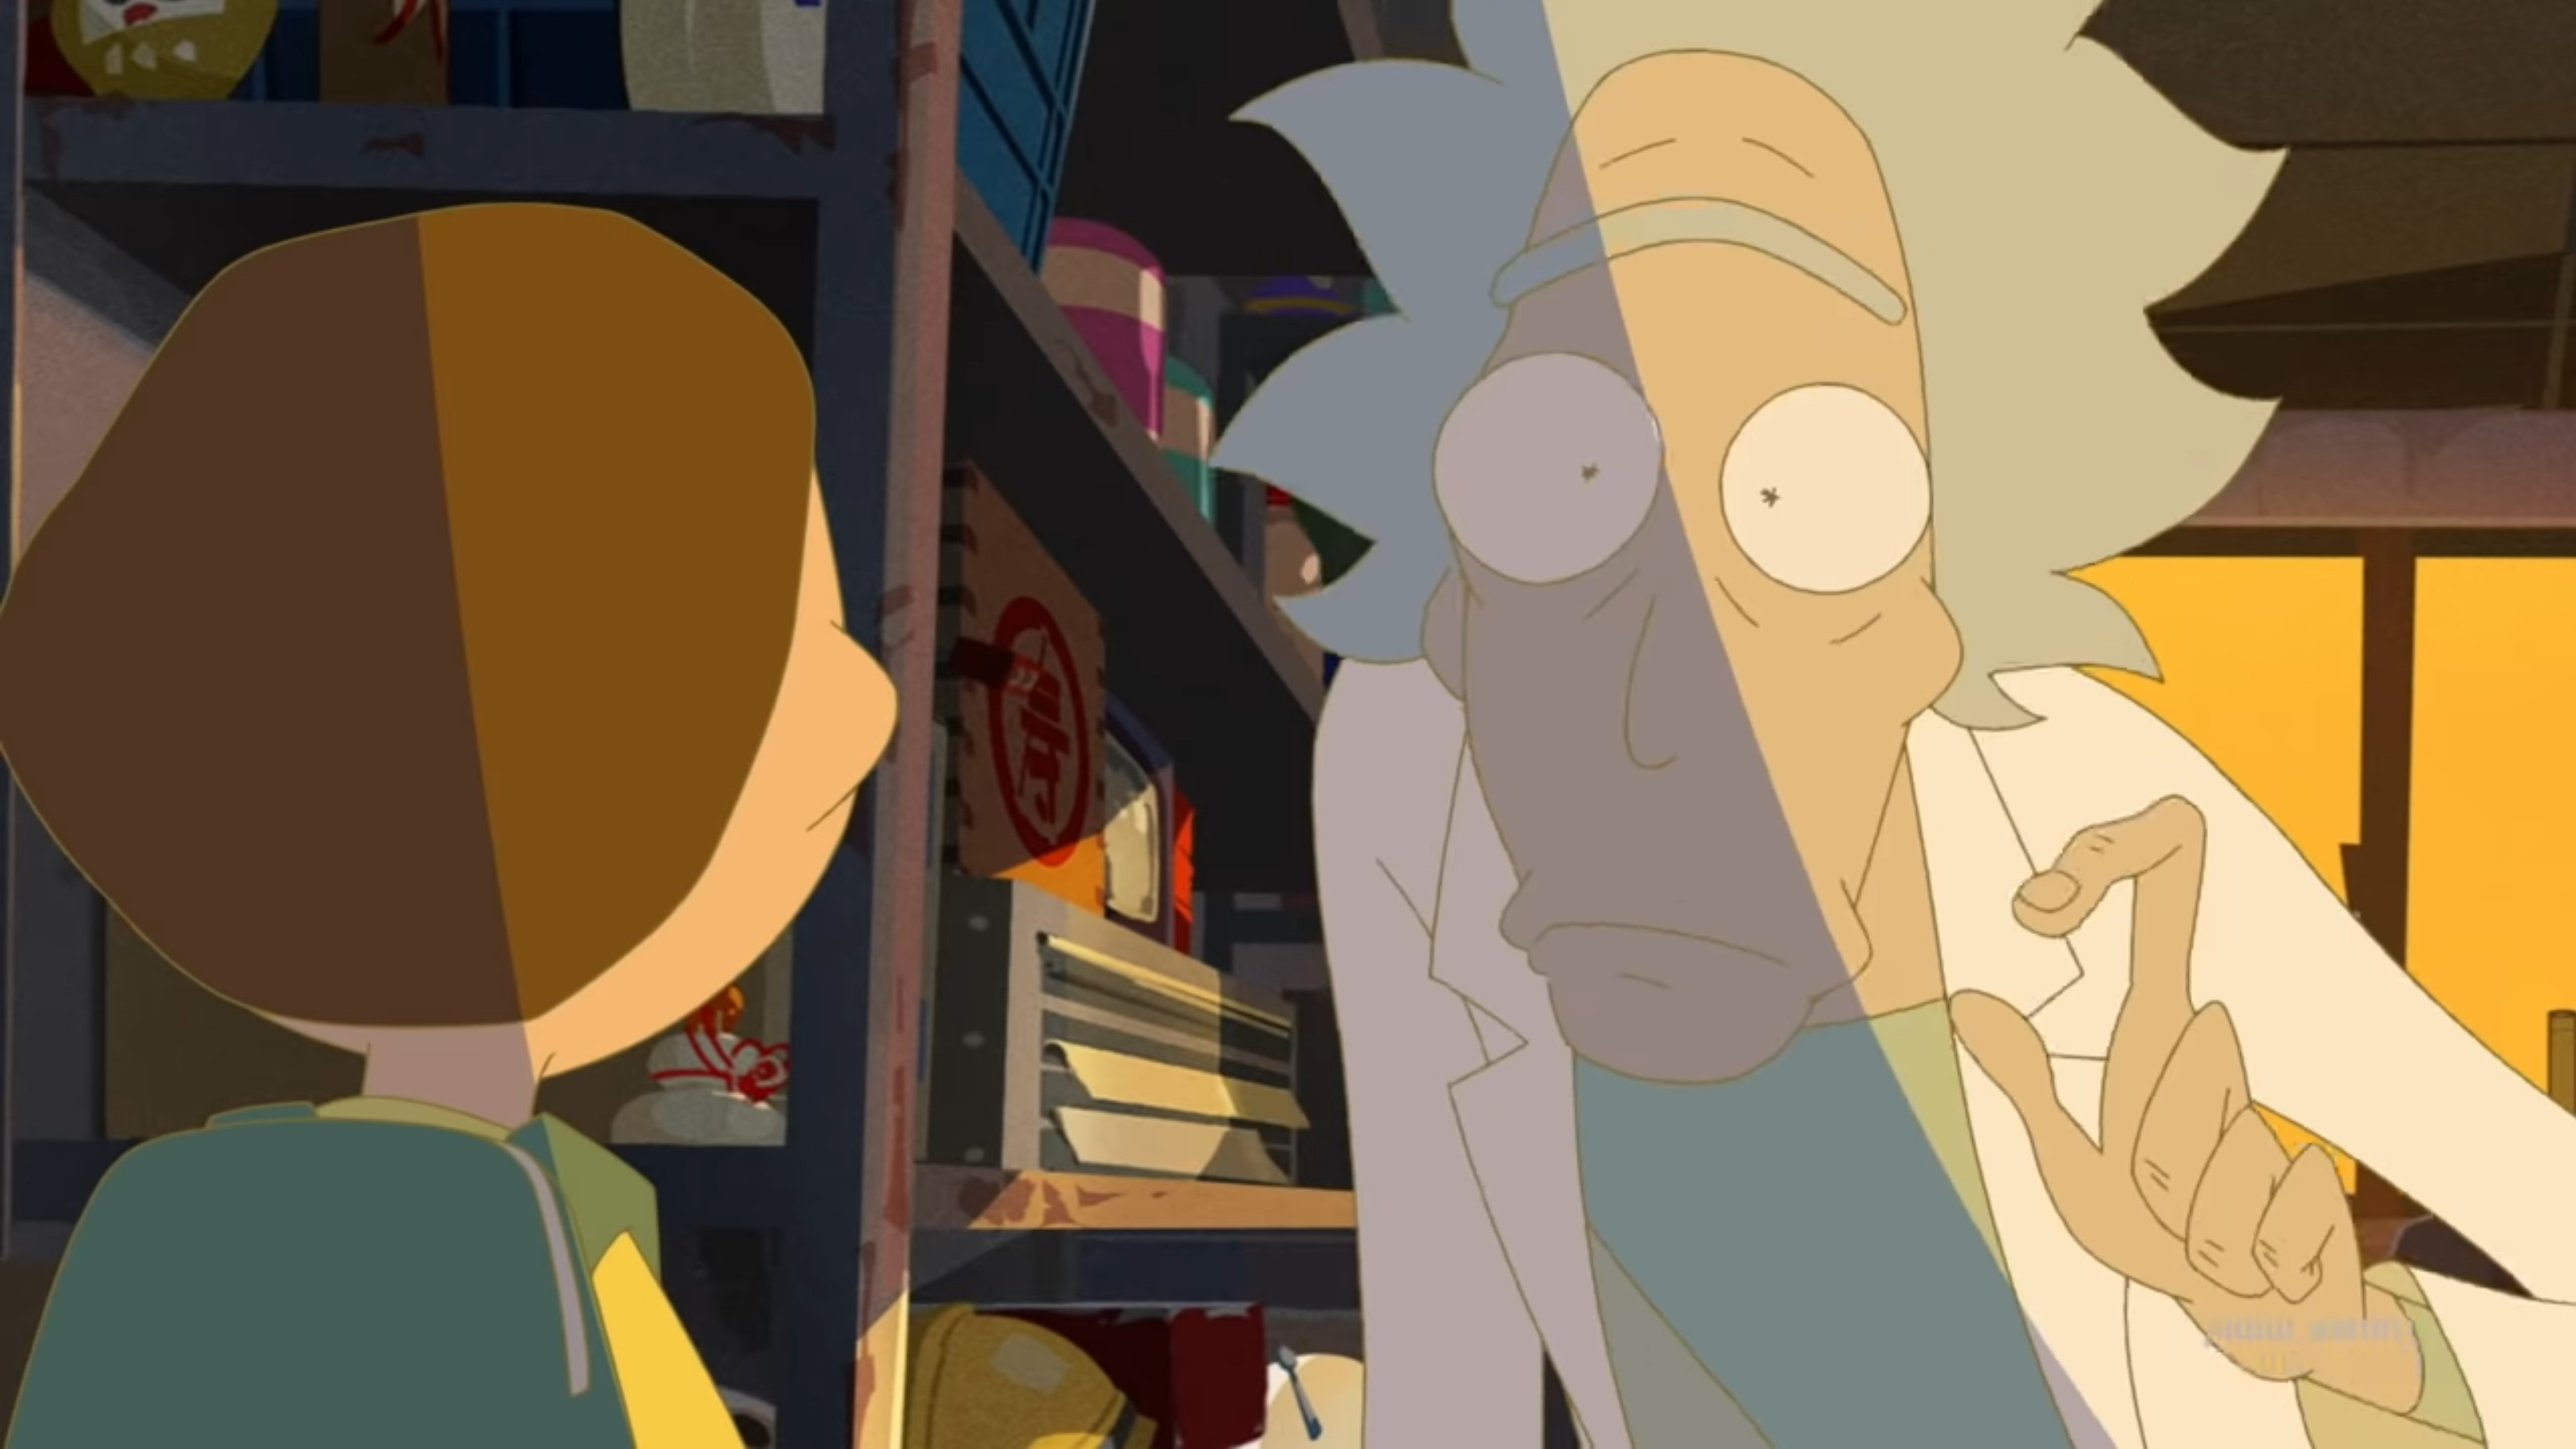 Adult Swim Unveils New Anime Series for Rick and Morty